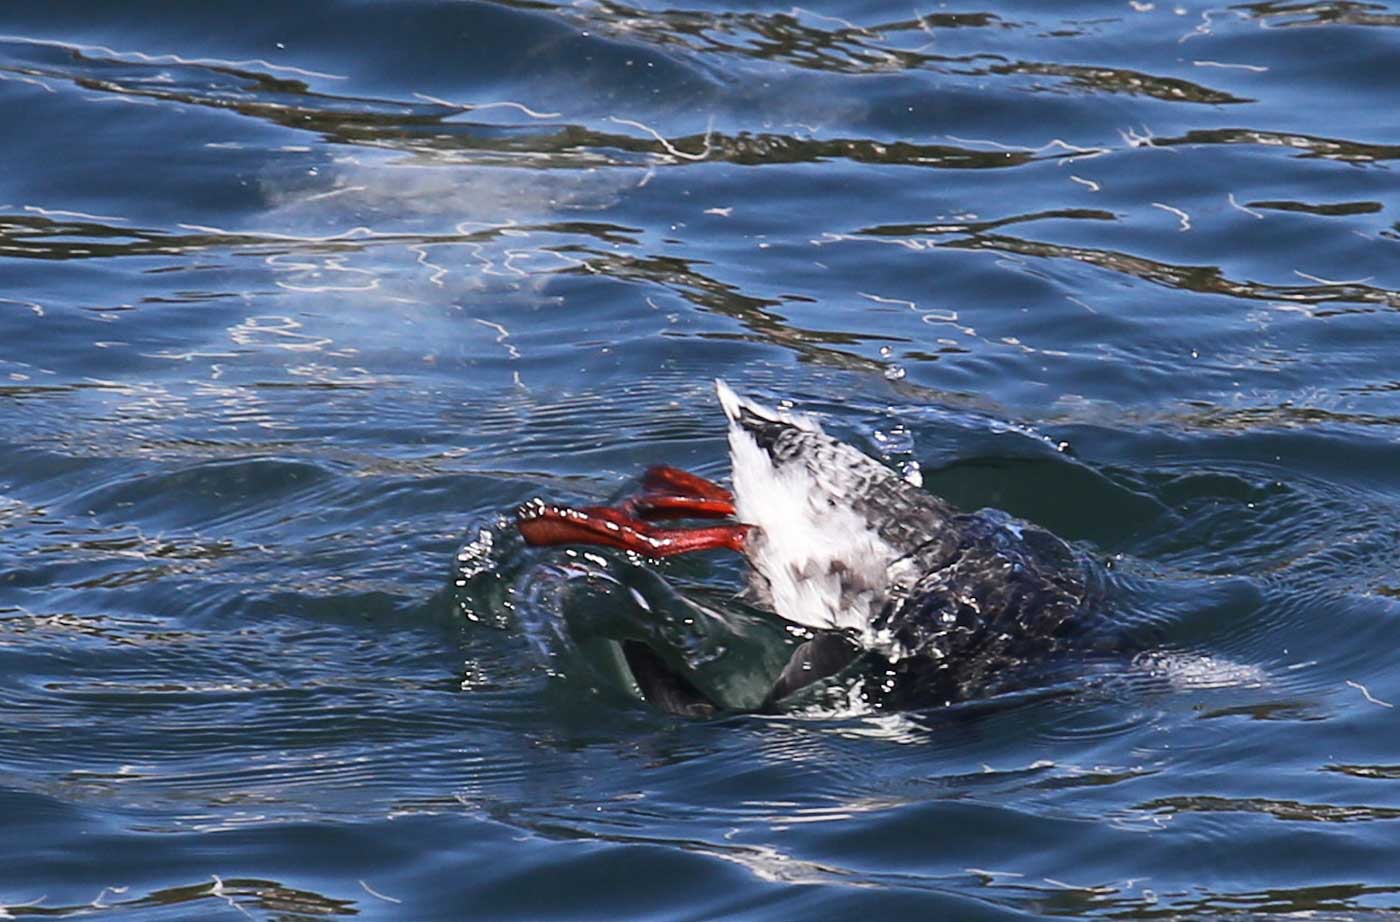 Black Guillemot in water red feet and legs showing